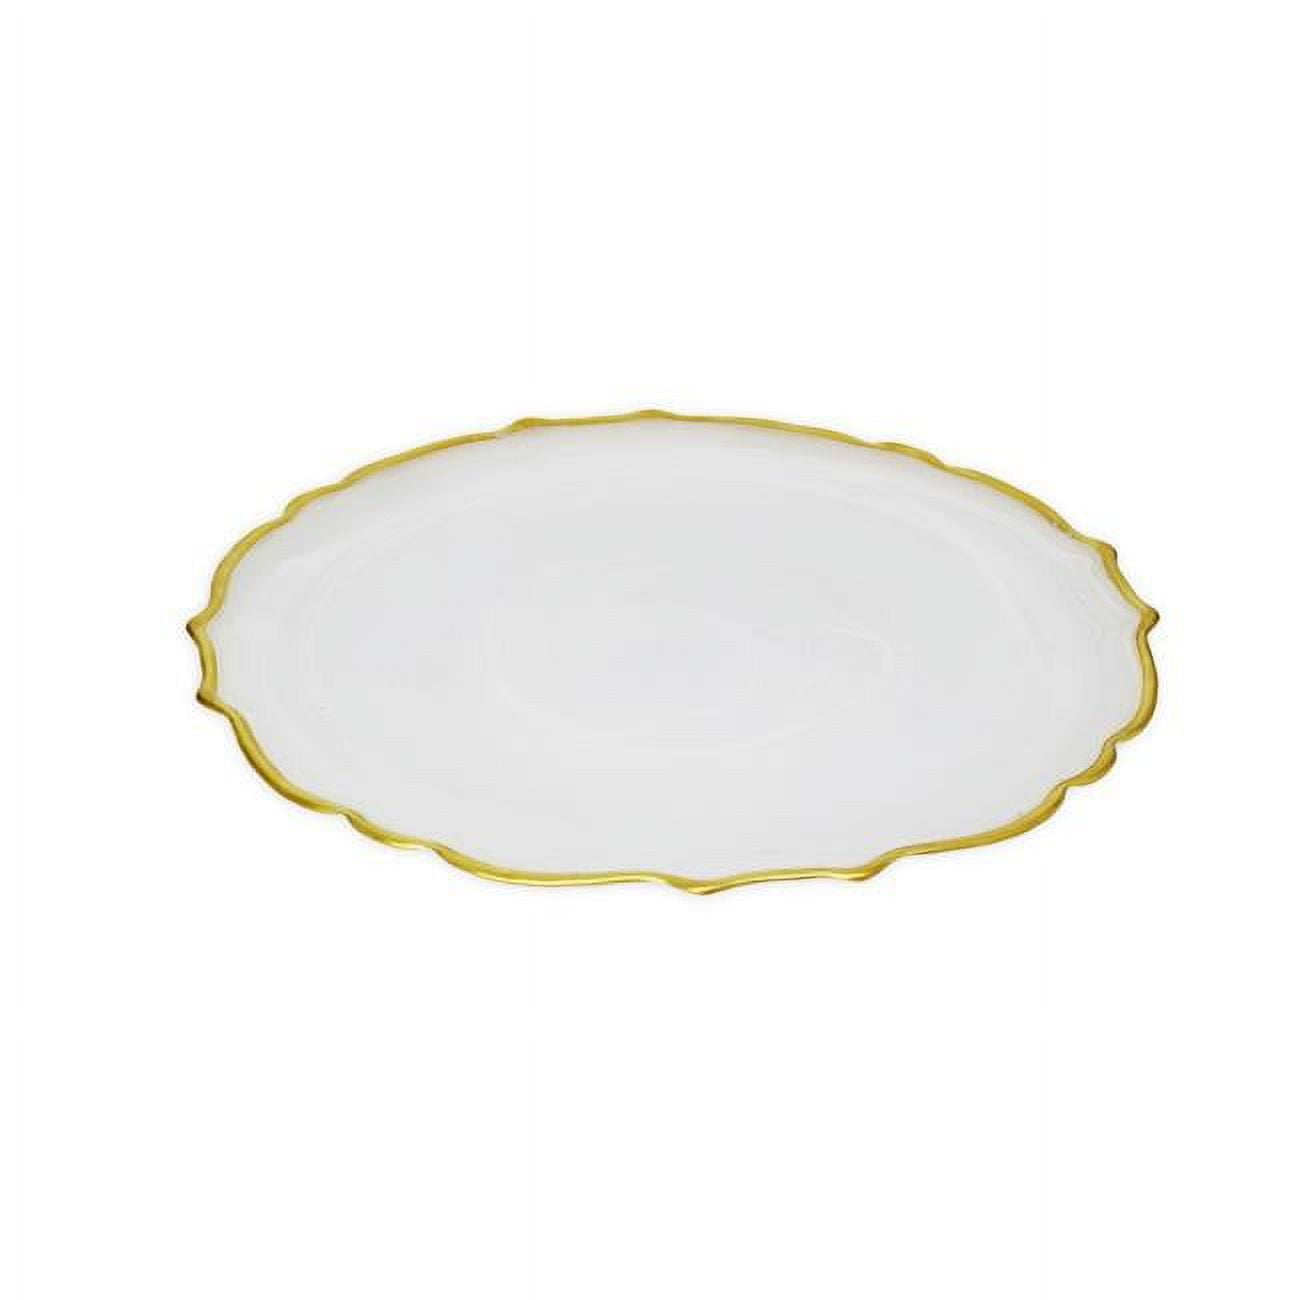 Classic Touch Cd407aw Alabaster White Dinner Plates With Gold Trim, Set Of 4